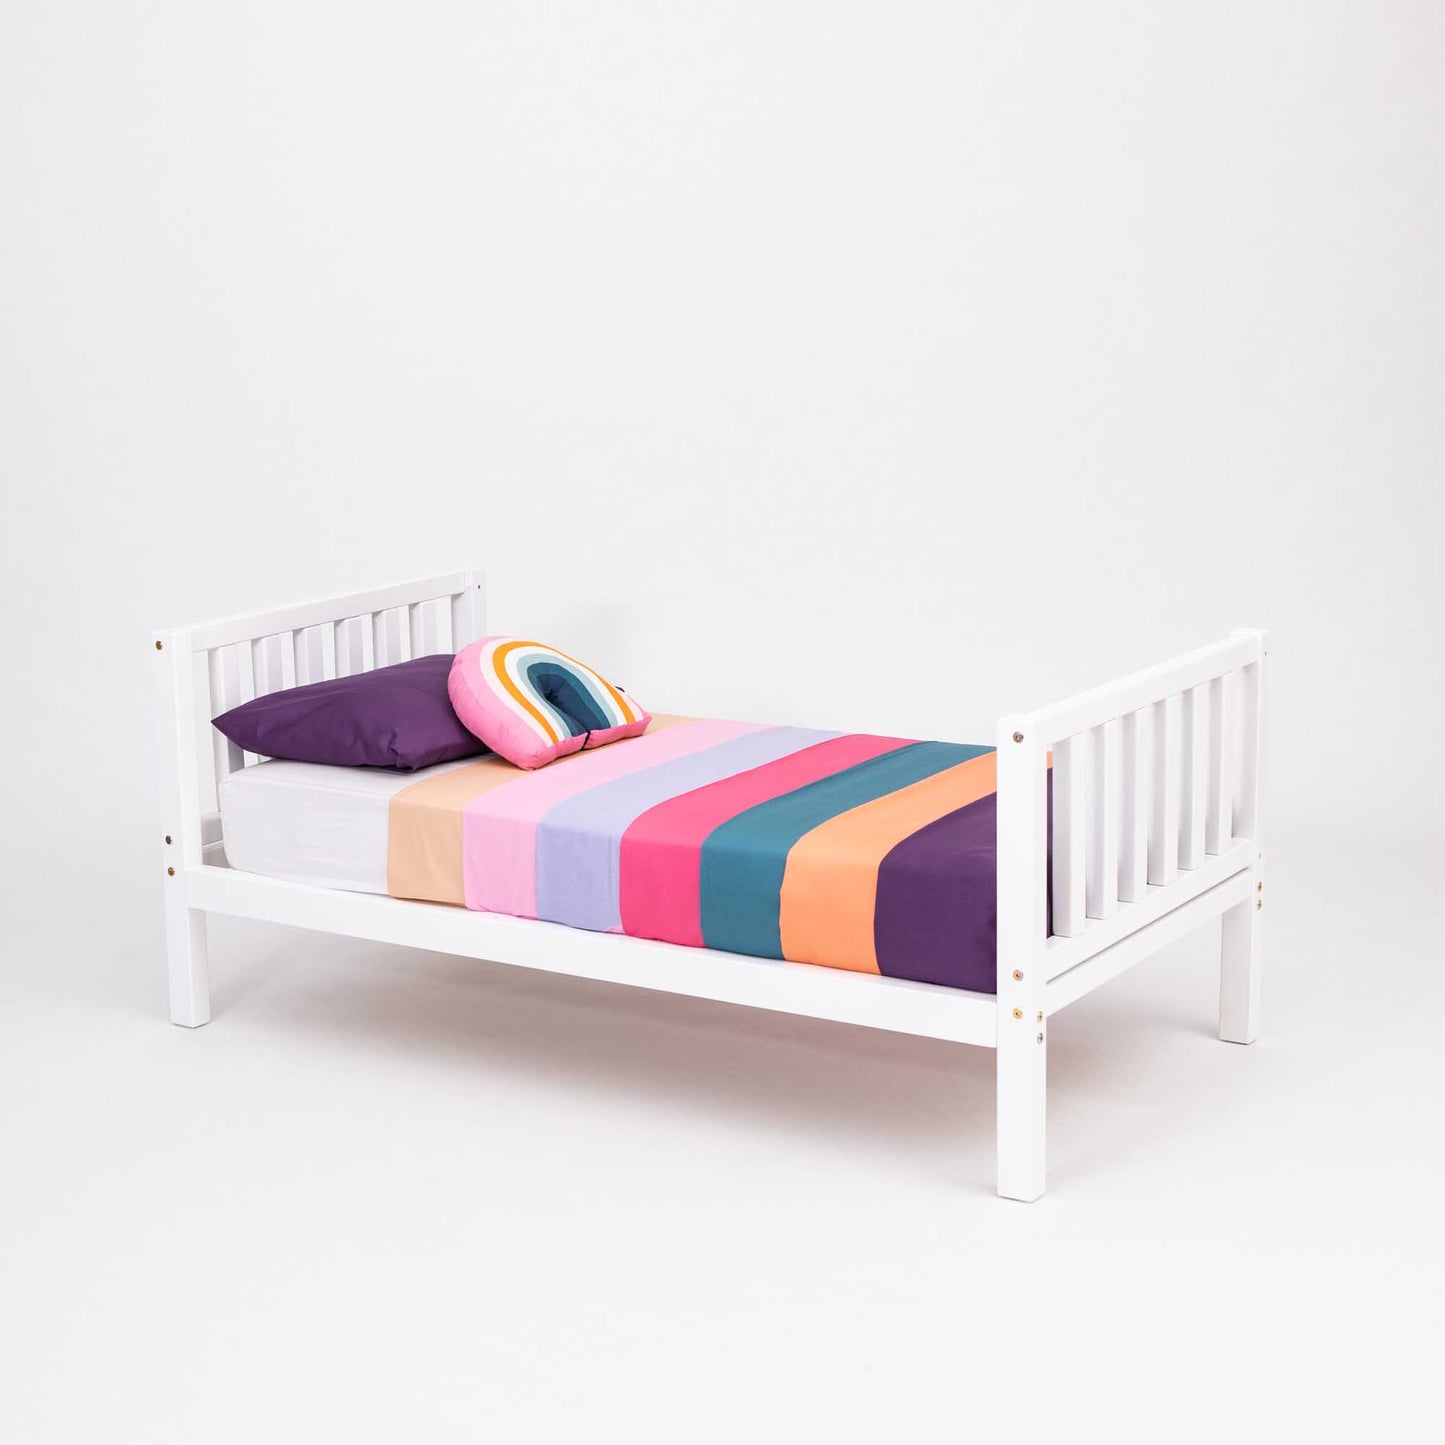 A Montessori furniture-inspired, raised kids' bed on legs with a headboard and footboard that encourages independence.